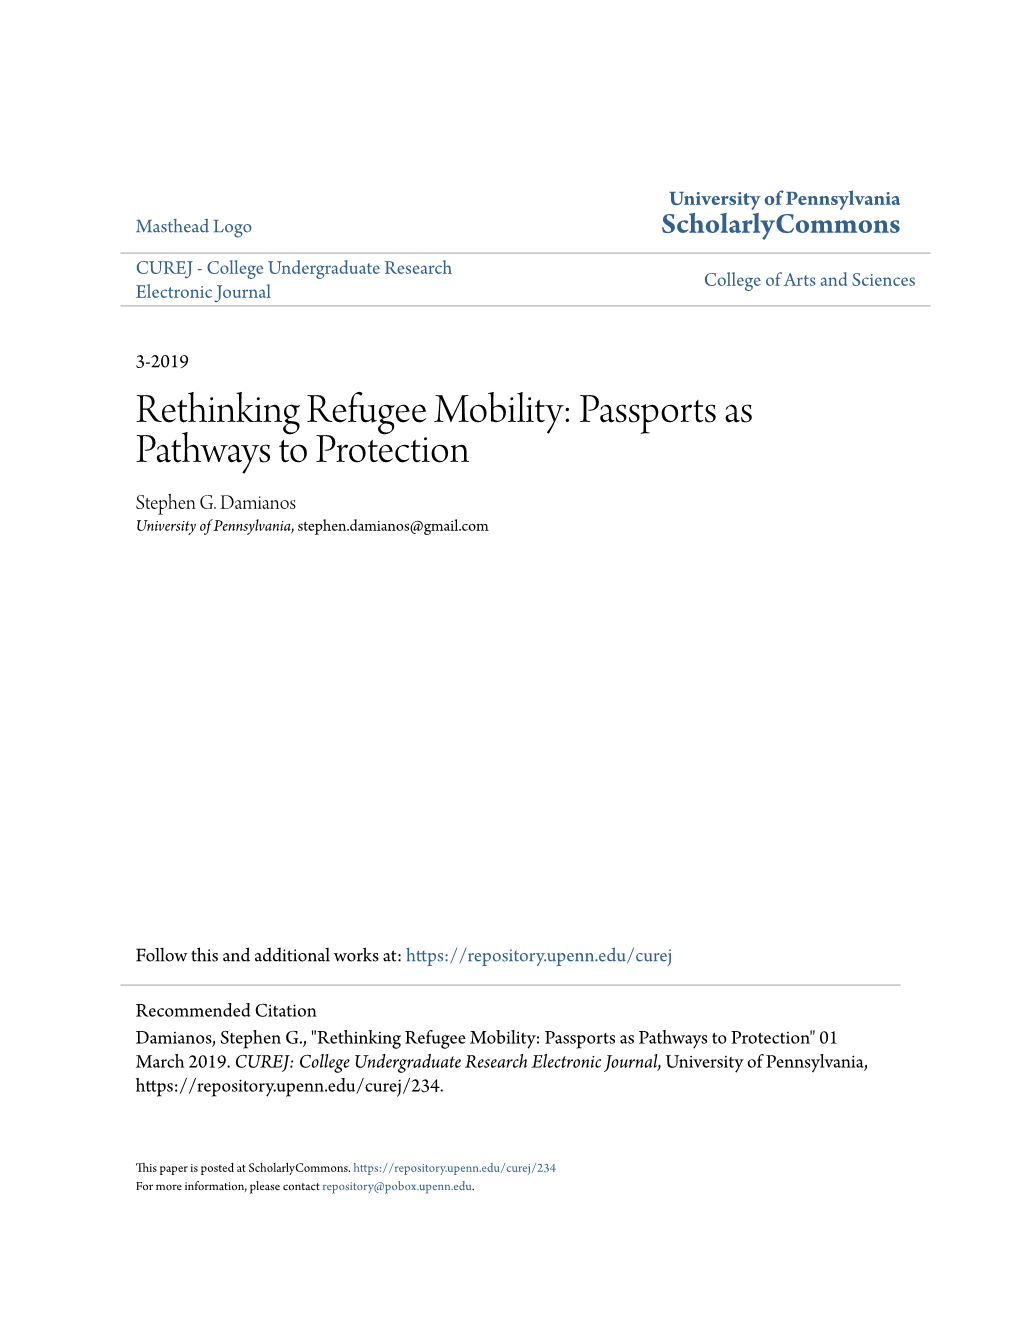 Rethinking Refugee Mobility: Passports As Pathways to Protection Stephen G